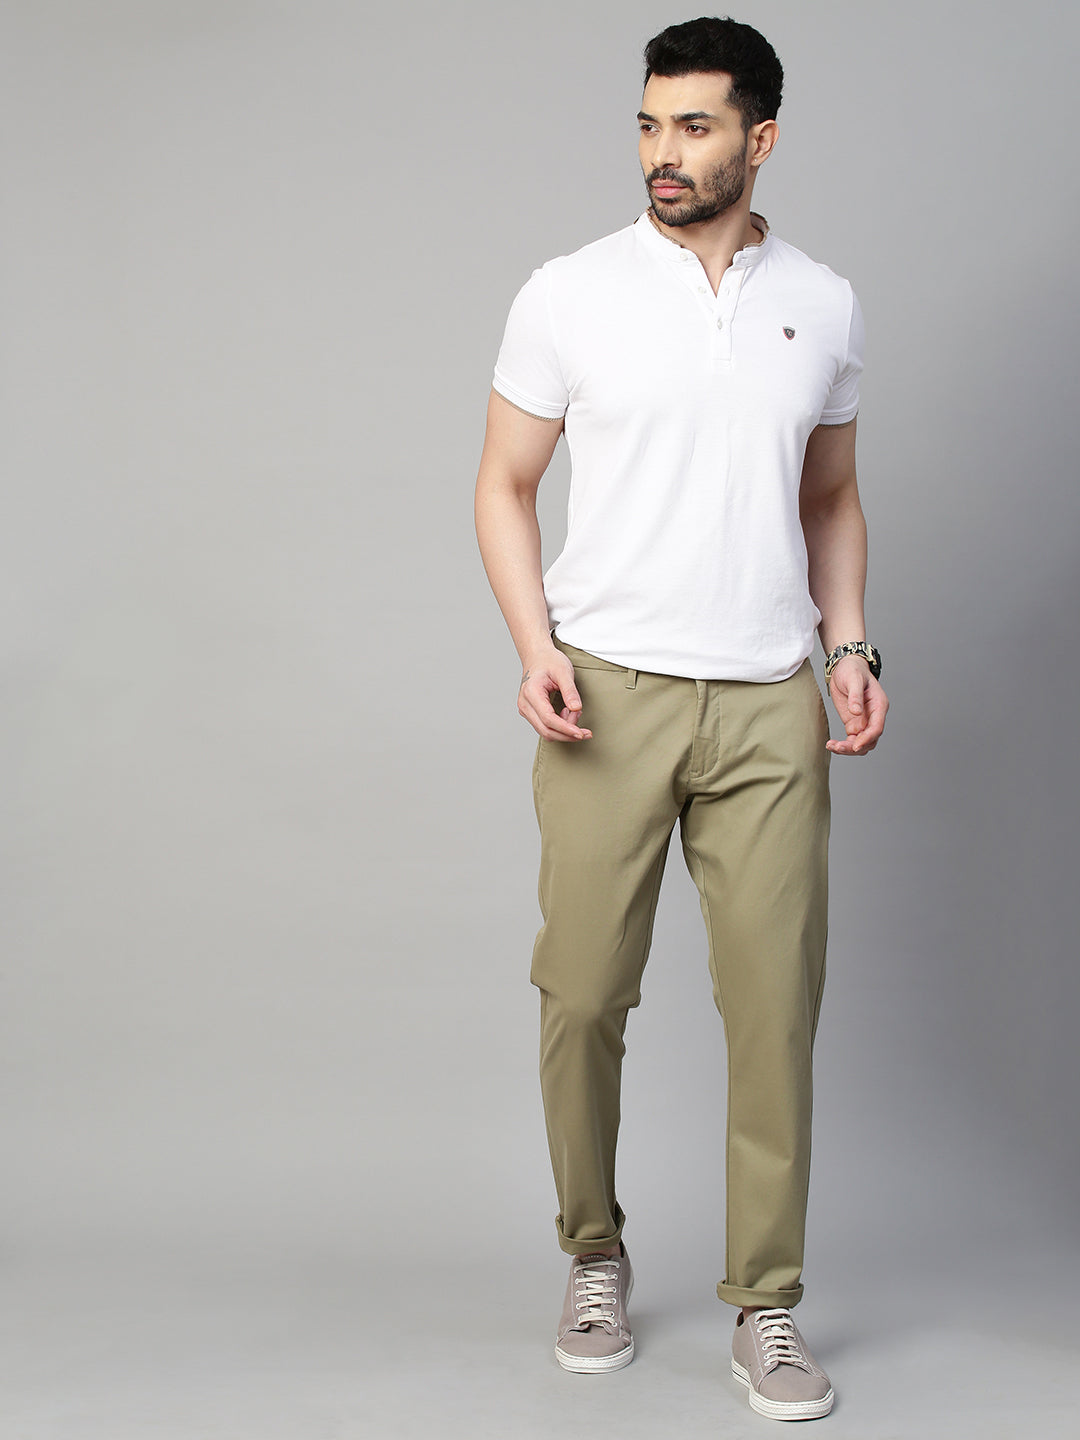 Genips Men's Green Cotton Stretch Caribbean Slim Fit Solid Trousers